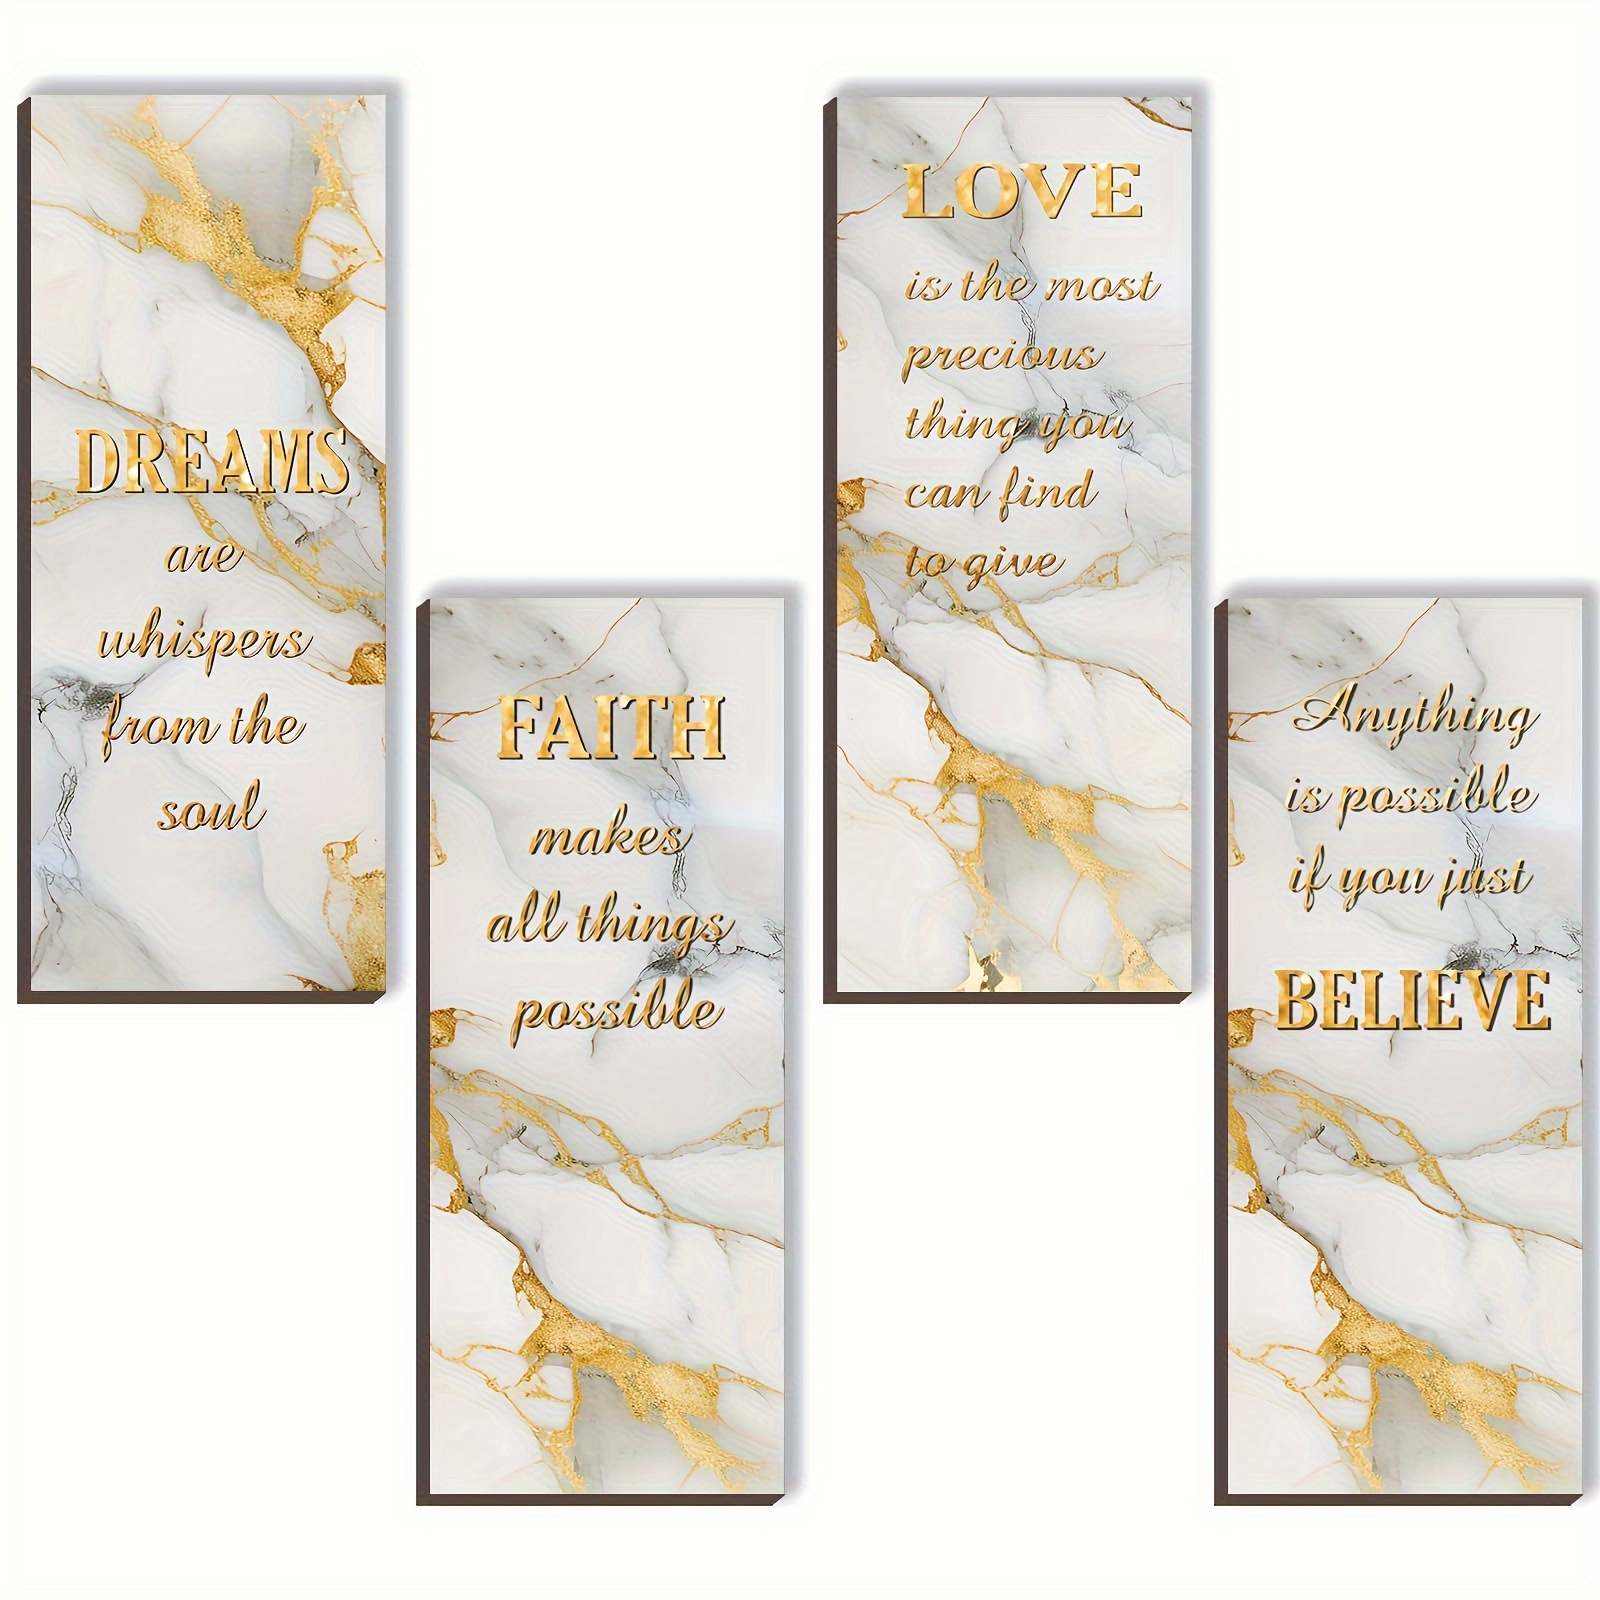 

4pcs/set, White And Gold Bathroom Decor Gold Wall Decor With Dreams Faith Love Believe Wooden Rustic Style Versatile Bathroom Accessories For Bedroom Living Room Kitchen 10*4inch/25*10cm